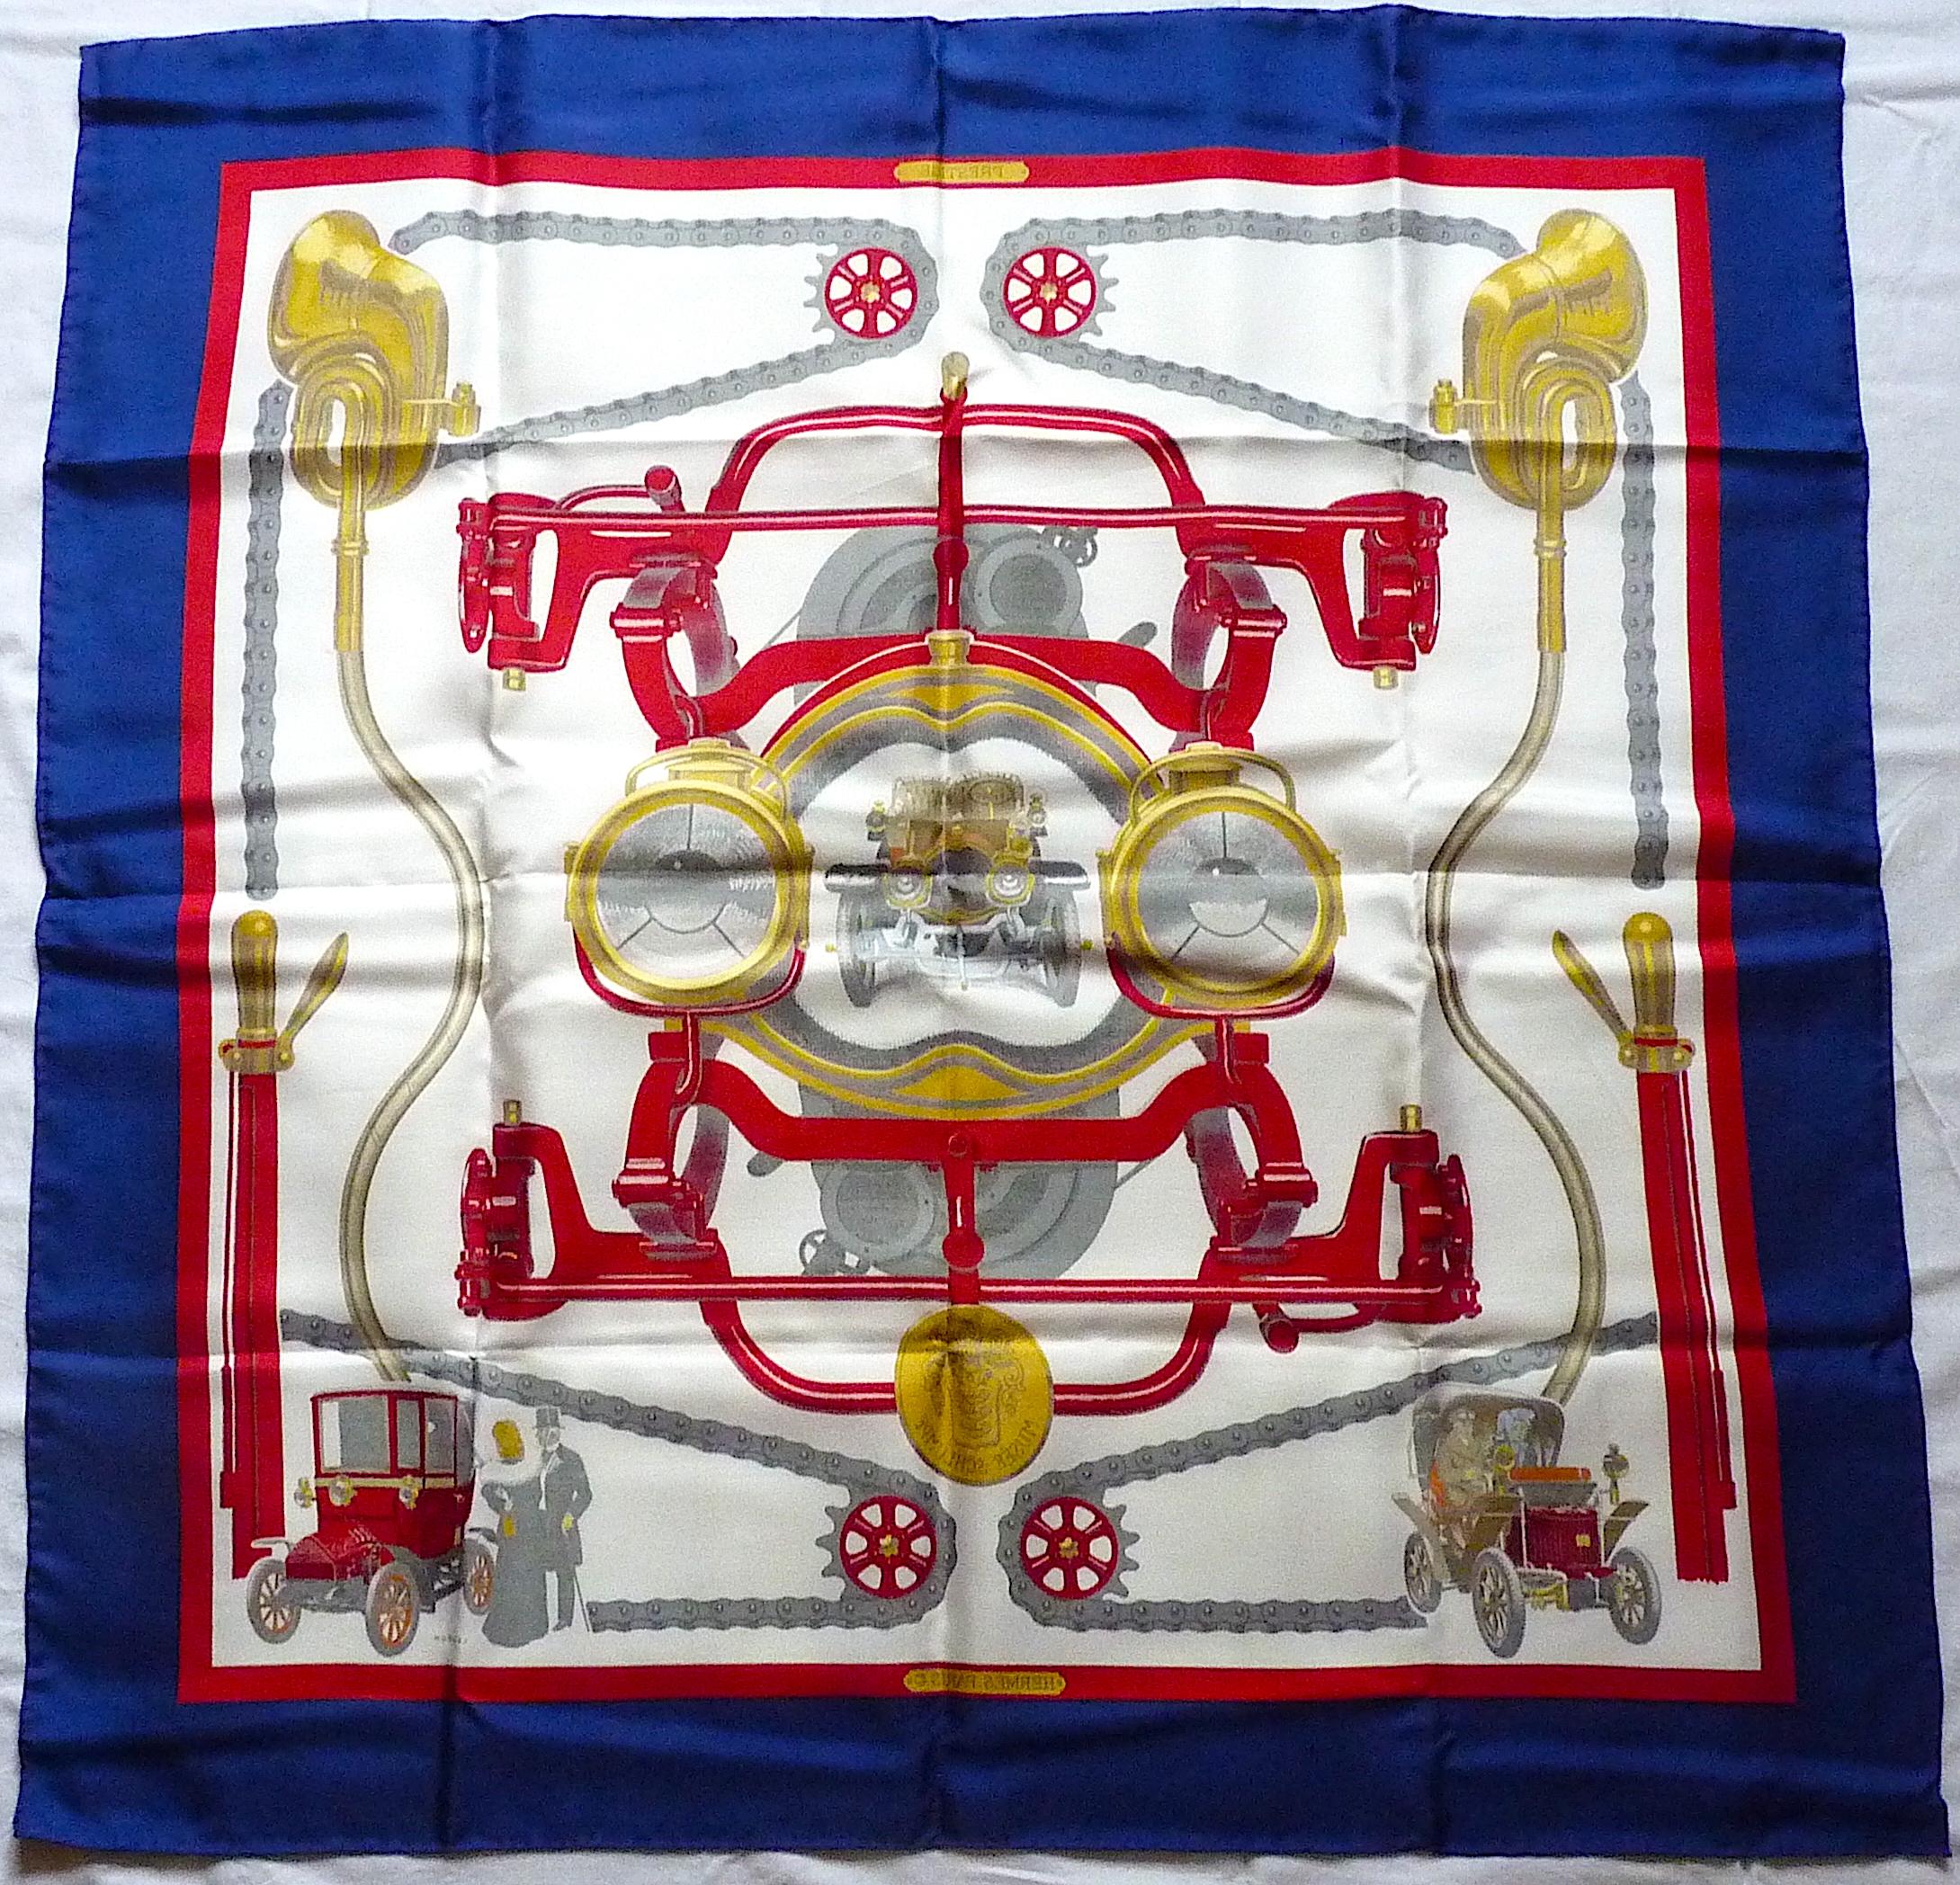 Hermes Scarf Teuf Teuf Special Edition for Musée Schlumpf in 1971 by Ledoux For Sale 2